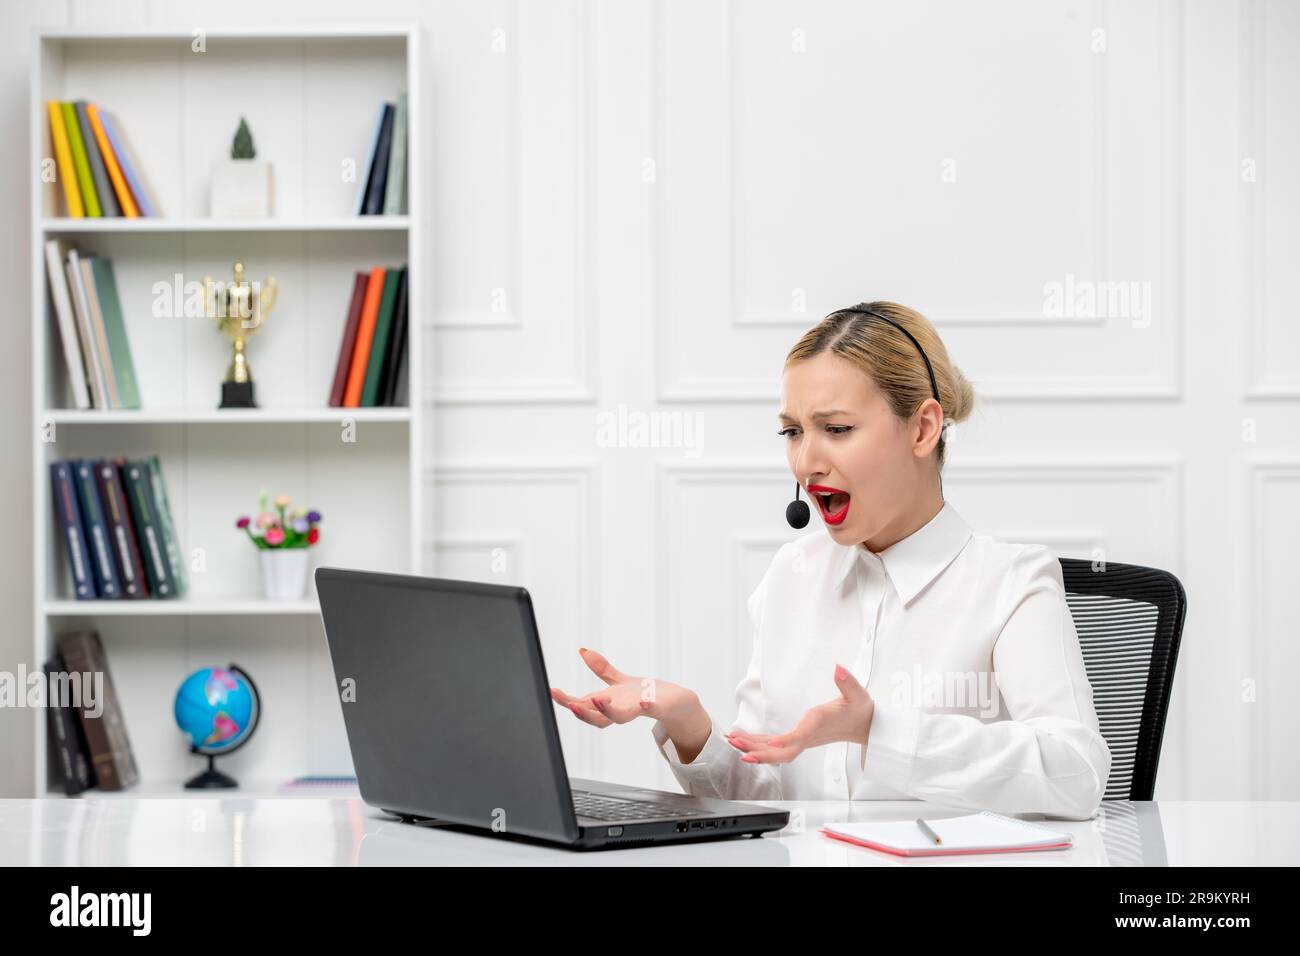 customer service cute blonde girl office shirt with headset and computer yelling and angry Stock Photo